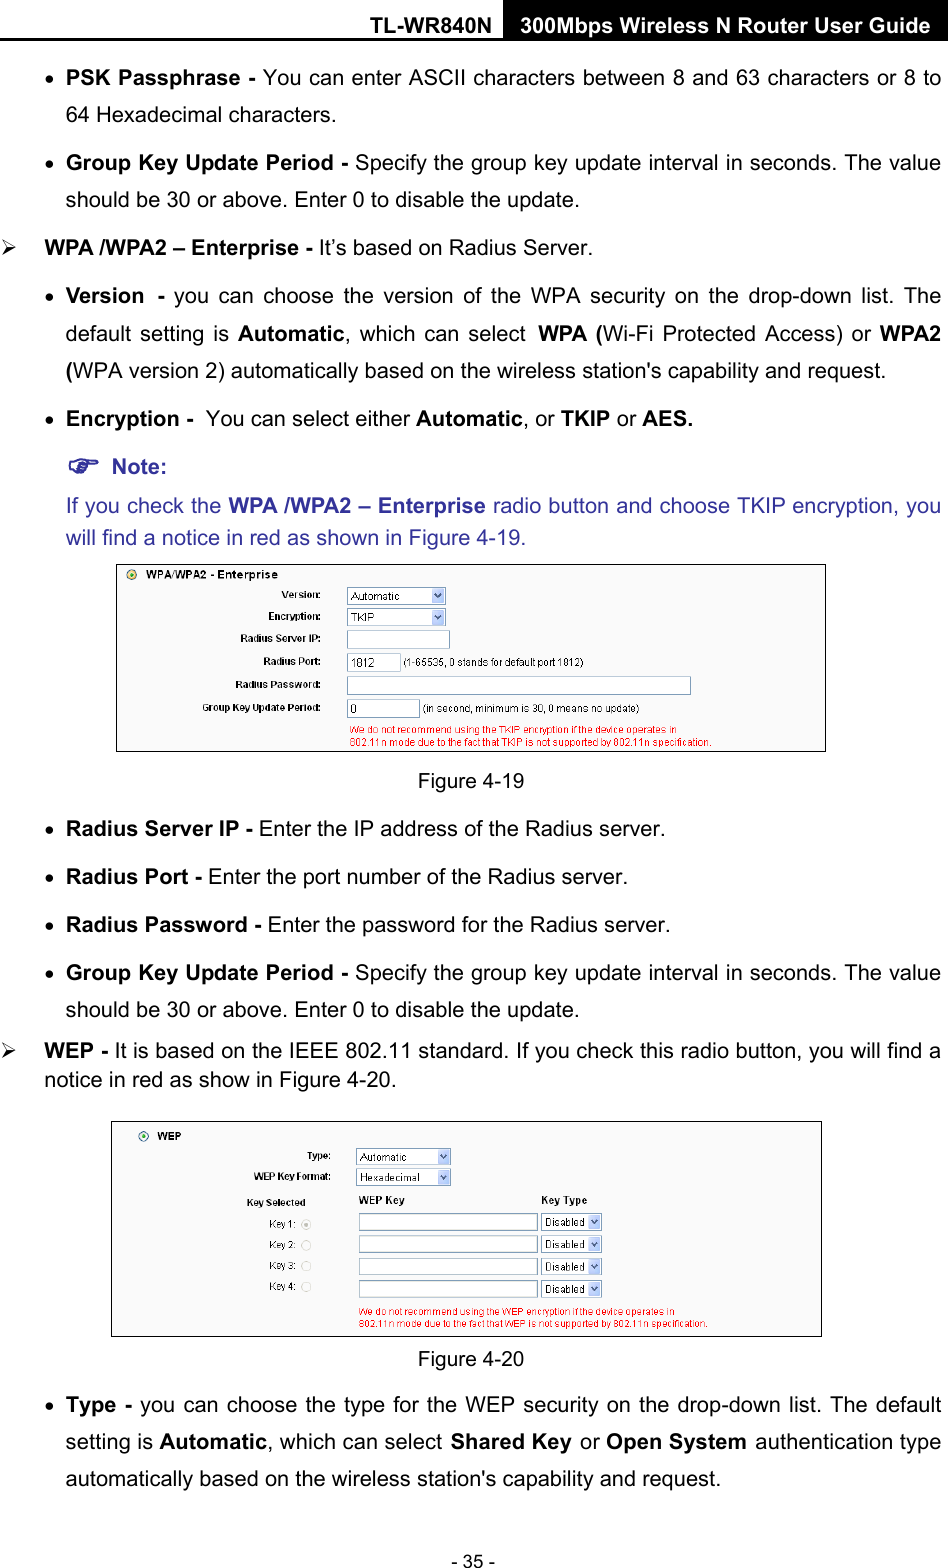 TL-WR840N 300Mbps Wireless N Router User Guide  - 35 - • PSK Passphrase - You can enter ASCII characters between 8 and 63 characters or 8 to 64 Hexadecimal characters. • Group Key Update Period - Specify the group key update interval in seconds. The value should be 30 or above. Enter 0 to disable the update.  WPA /WPA2 – Enterprise - It’s based on Radius Server. • Version - you can choose the version of the WPA security on the drop-down list. The default setting is Automatic, which can select WPA  (Wi-Fi Protected Access)  or  WPA2 (WPA version 2) automatically based on the wireless station&apos;s capability and request. • Encryption - You can select either Automatic, or TKIP or AES.  Note: If you check the WPA /WPA2 – Enterprise radio button and choose TKIP encryption, you will find a notice in red as shown in Figure 4-19.  Figure 4-19 • Radius Server IP - Enter the IP address of the Radius server. • Radius Port - Enter the port number of the Radius server. • Radius Password - Enter the password for the Radius server. • Group Key Update Period - Specify the group key update interval in seconds. The value should be 30 or above. Enter 0 to disable the update.  WEP - It is based on the IEEE 802.11 standard. If you check this radio button, you will find a notice in red as show in Figure 4-20.    Figure 4-20 • Type - you can choose the type for the WEP security on the drop-down list. The default setting is Automatic, which can select Shared Key or Open System authentication type automatically based on the wireless station&apos;s capability and request. 